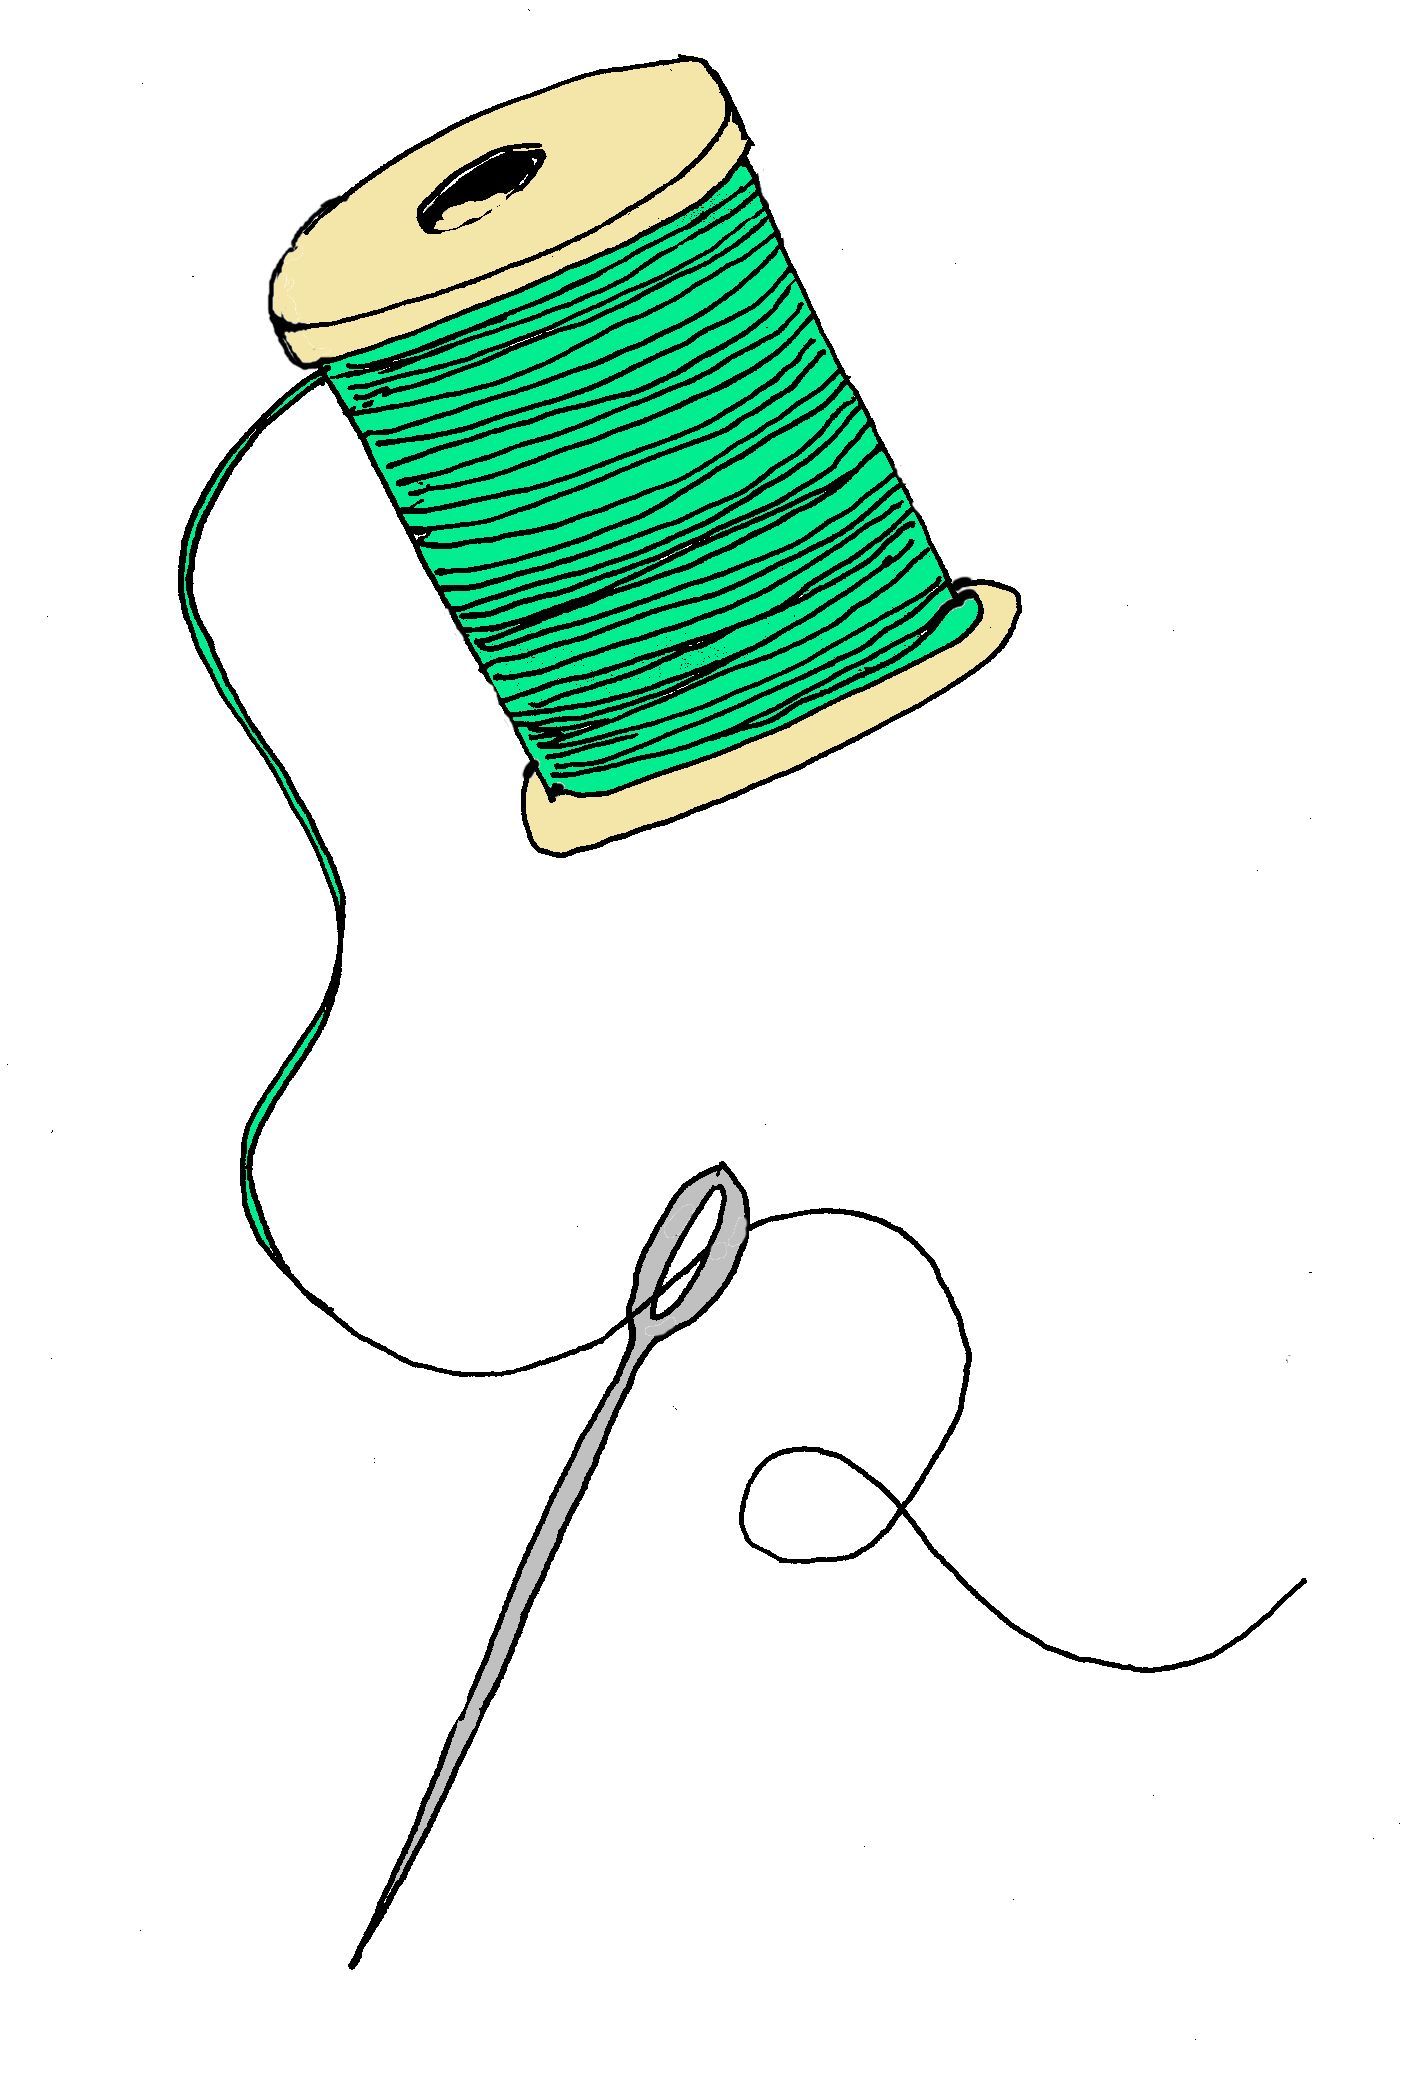 Sewing Threads Clipart - ClipArt Best